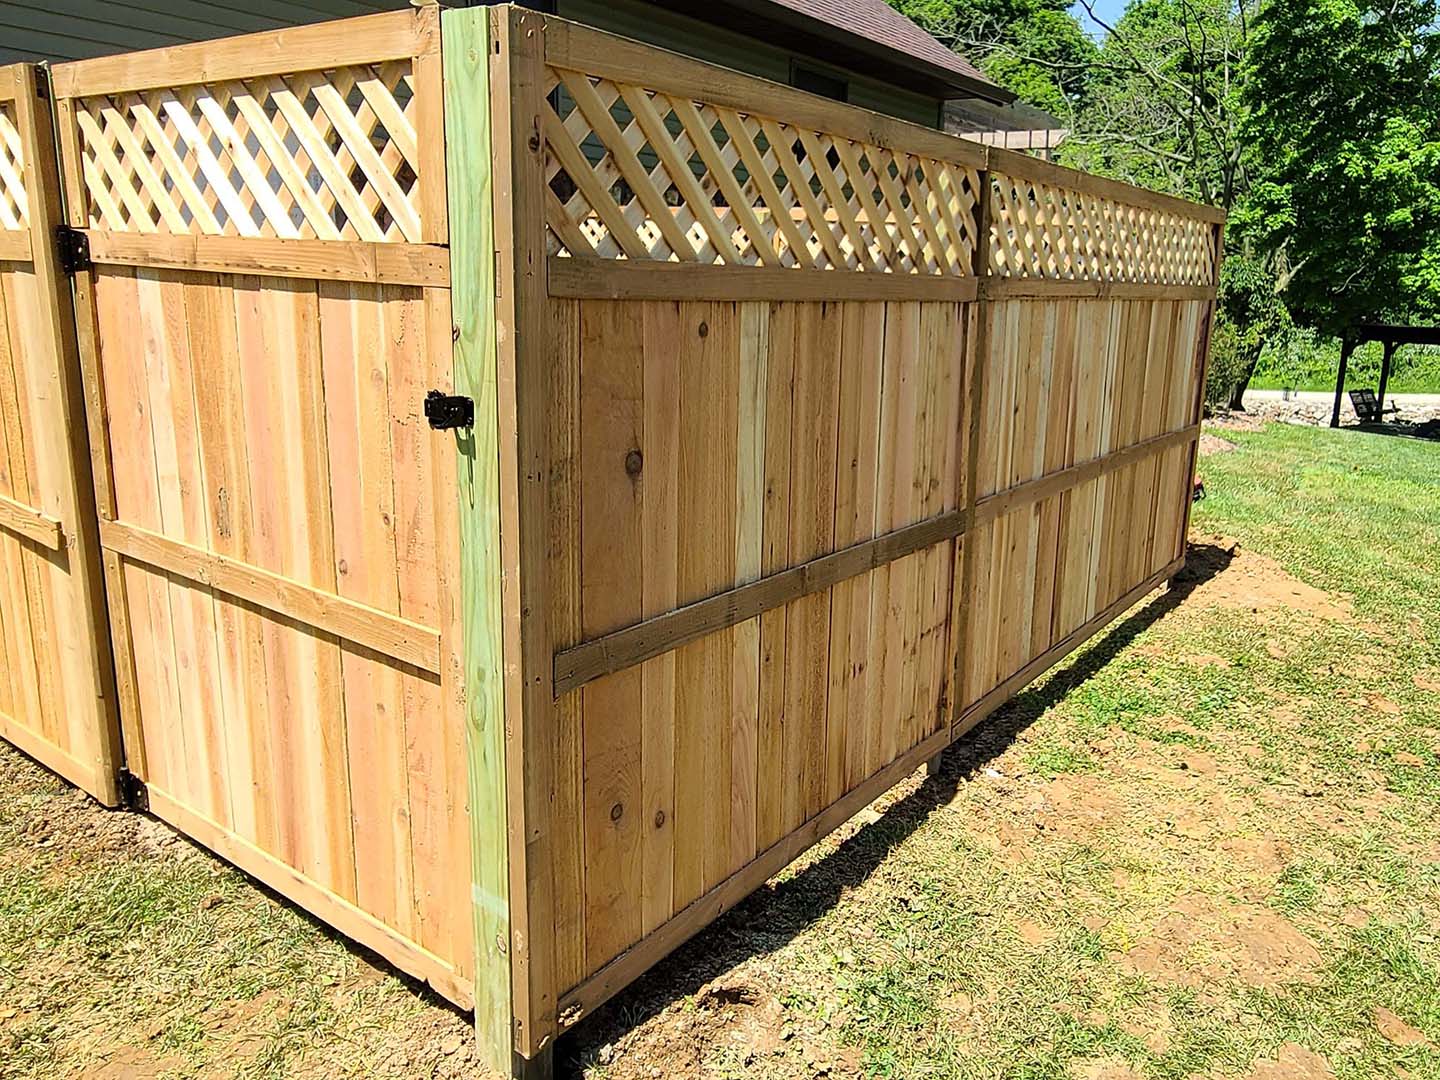 Spencer Indiana residential fencing company